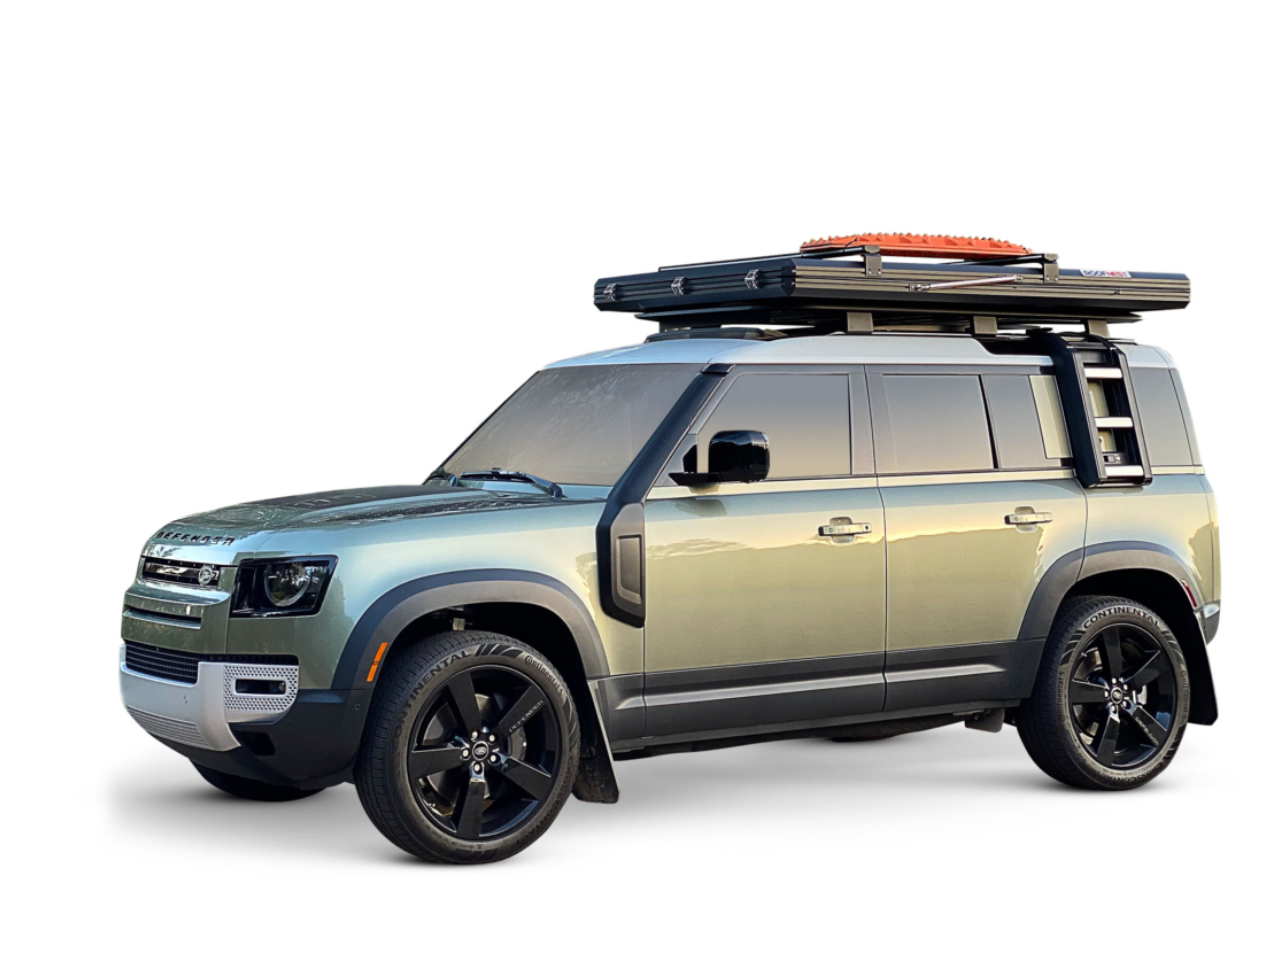 Xtreme Expedition Aluminium Roof Top Tent